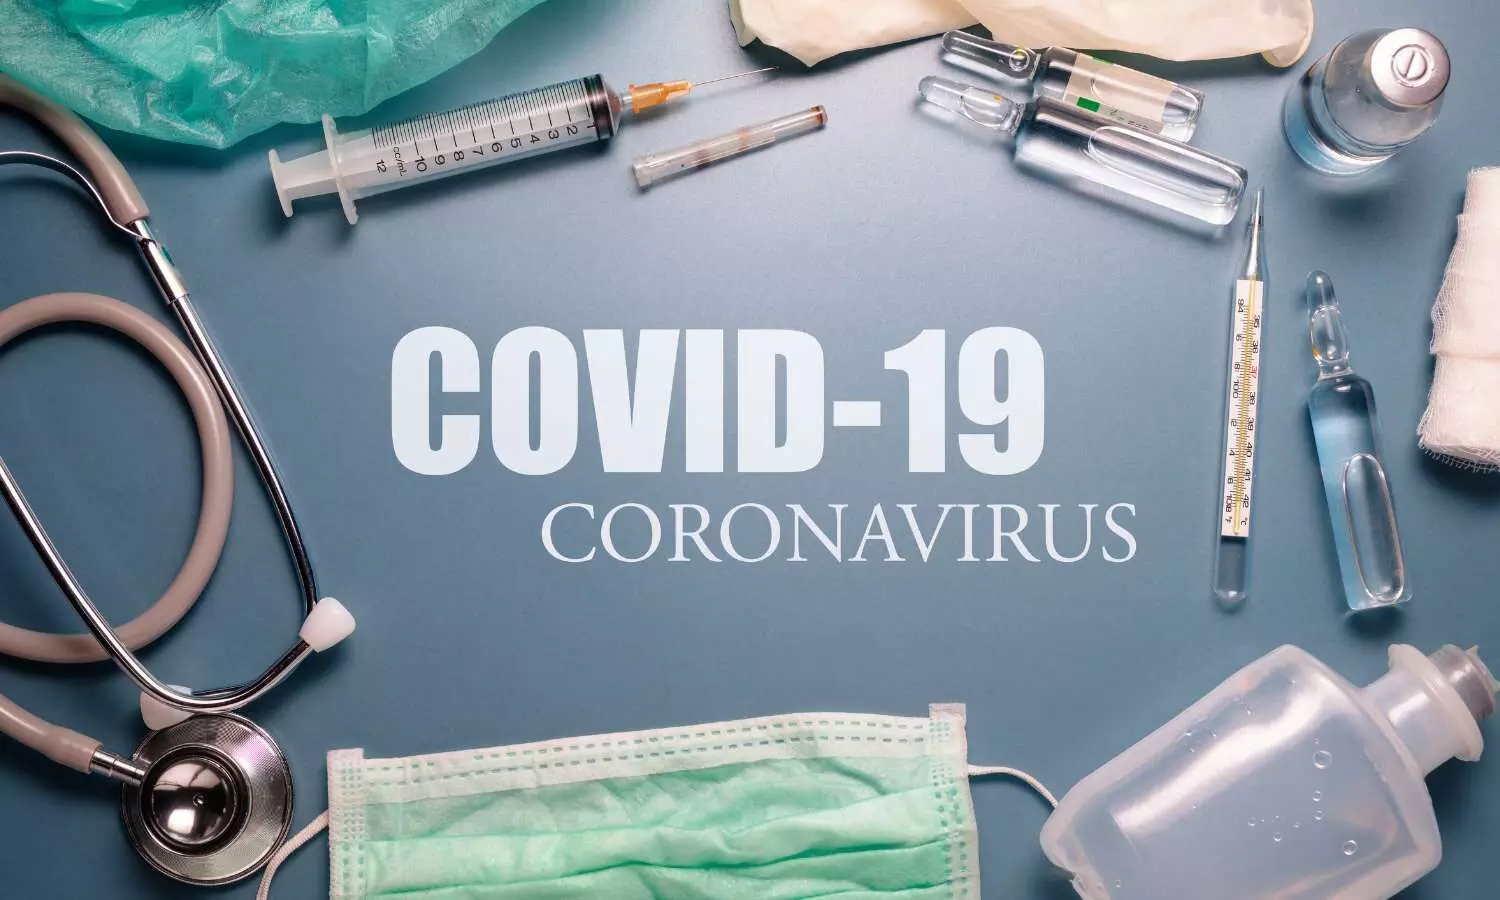 Remdesivir with corticosteroids reduces mortality in COVID-19 patients in ICU: Study